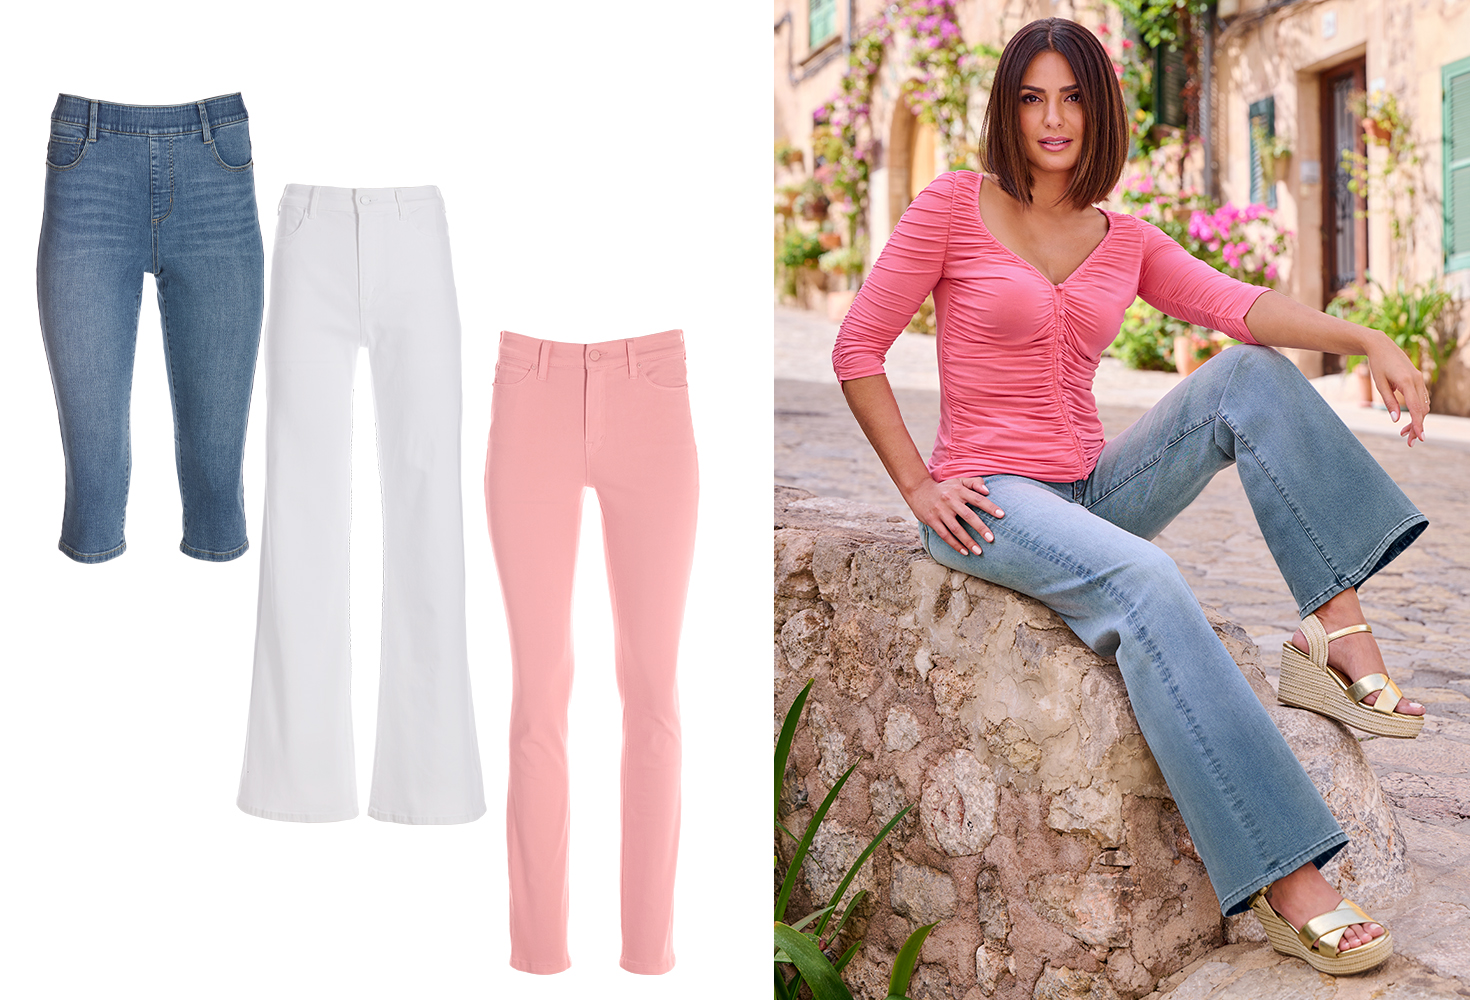 Right model wearing a pink ruched v-neck three-quarter sleeve top, palazzo jeans, and gold metallic wedges while sitting on a rock. Left panel shows three pairs of jeans: denim cropped jeans, white palazzo jeans, and pink slim jeans.